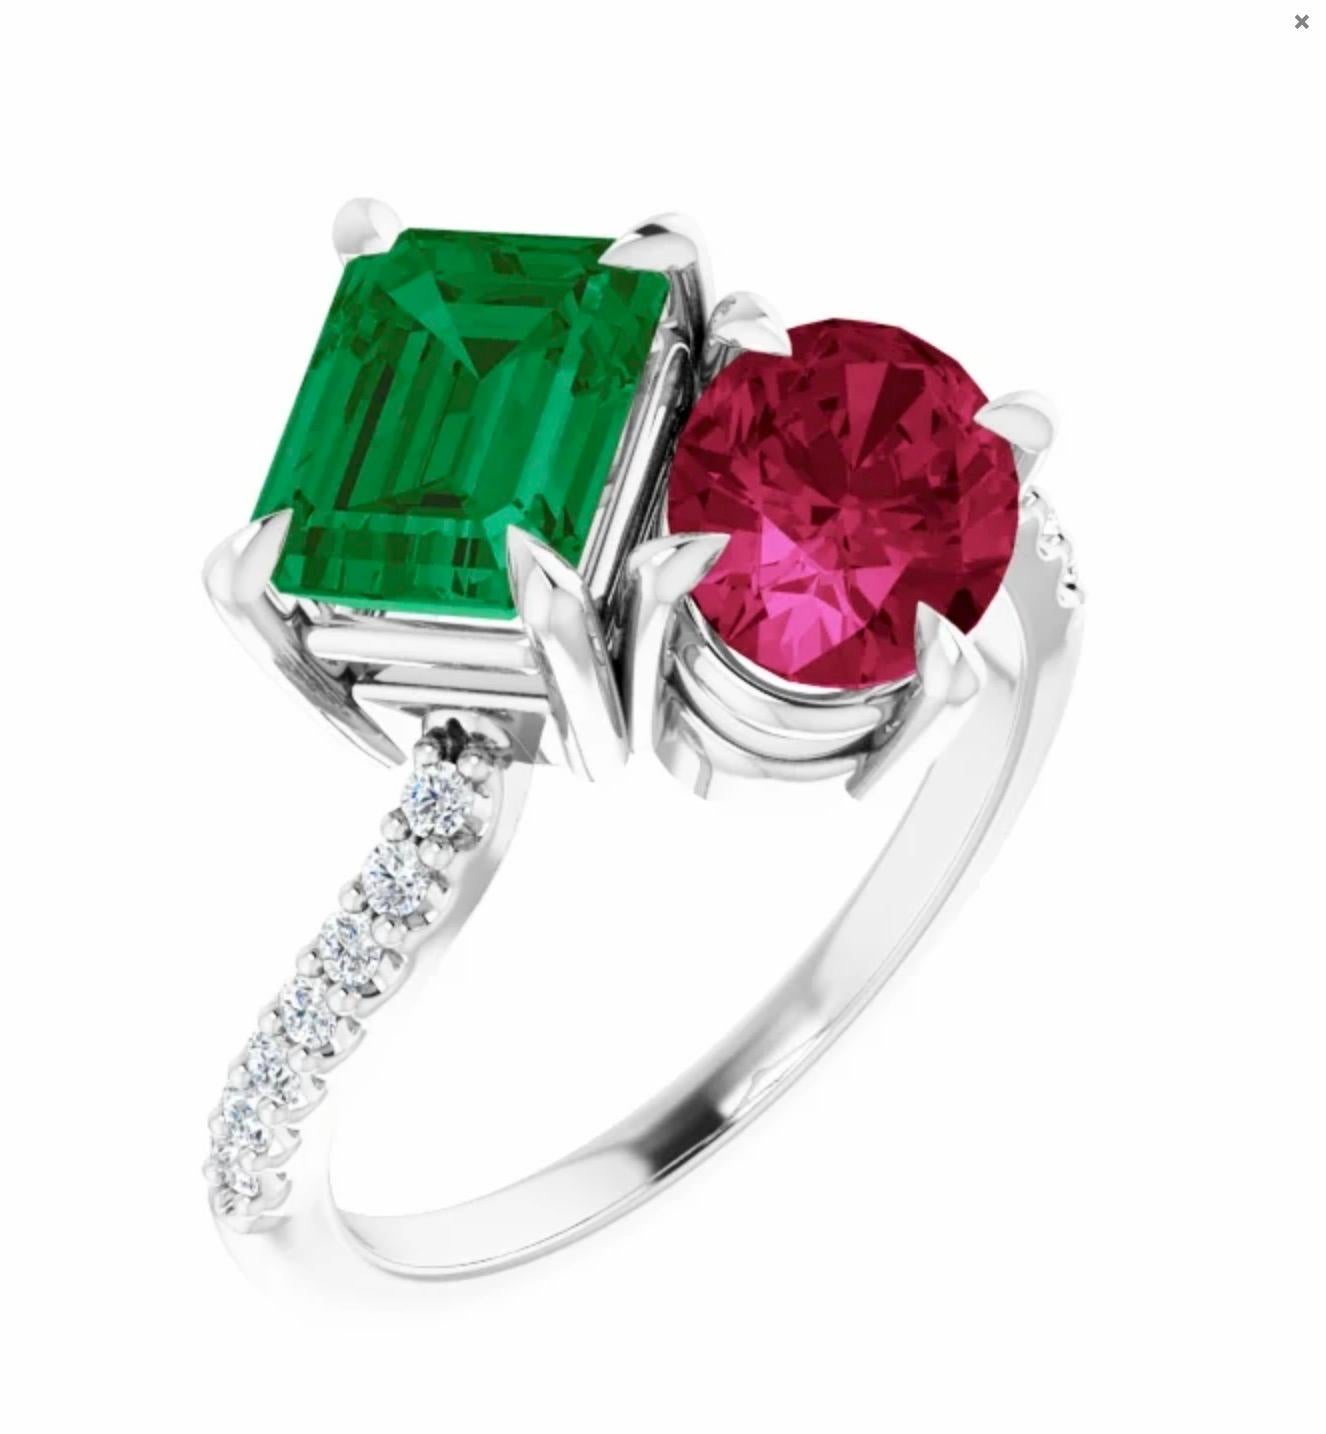 A truly outstanding piece that's guaranteed to make a statement. This bypass ring is very well crafted in solid platinum( different metals available). Features an emerald-cut AAA Colombian emerald neatly prong set at one end of the bypass design.